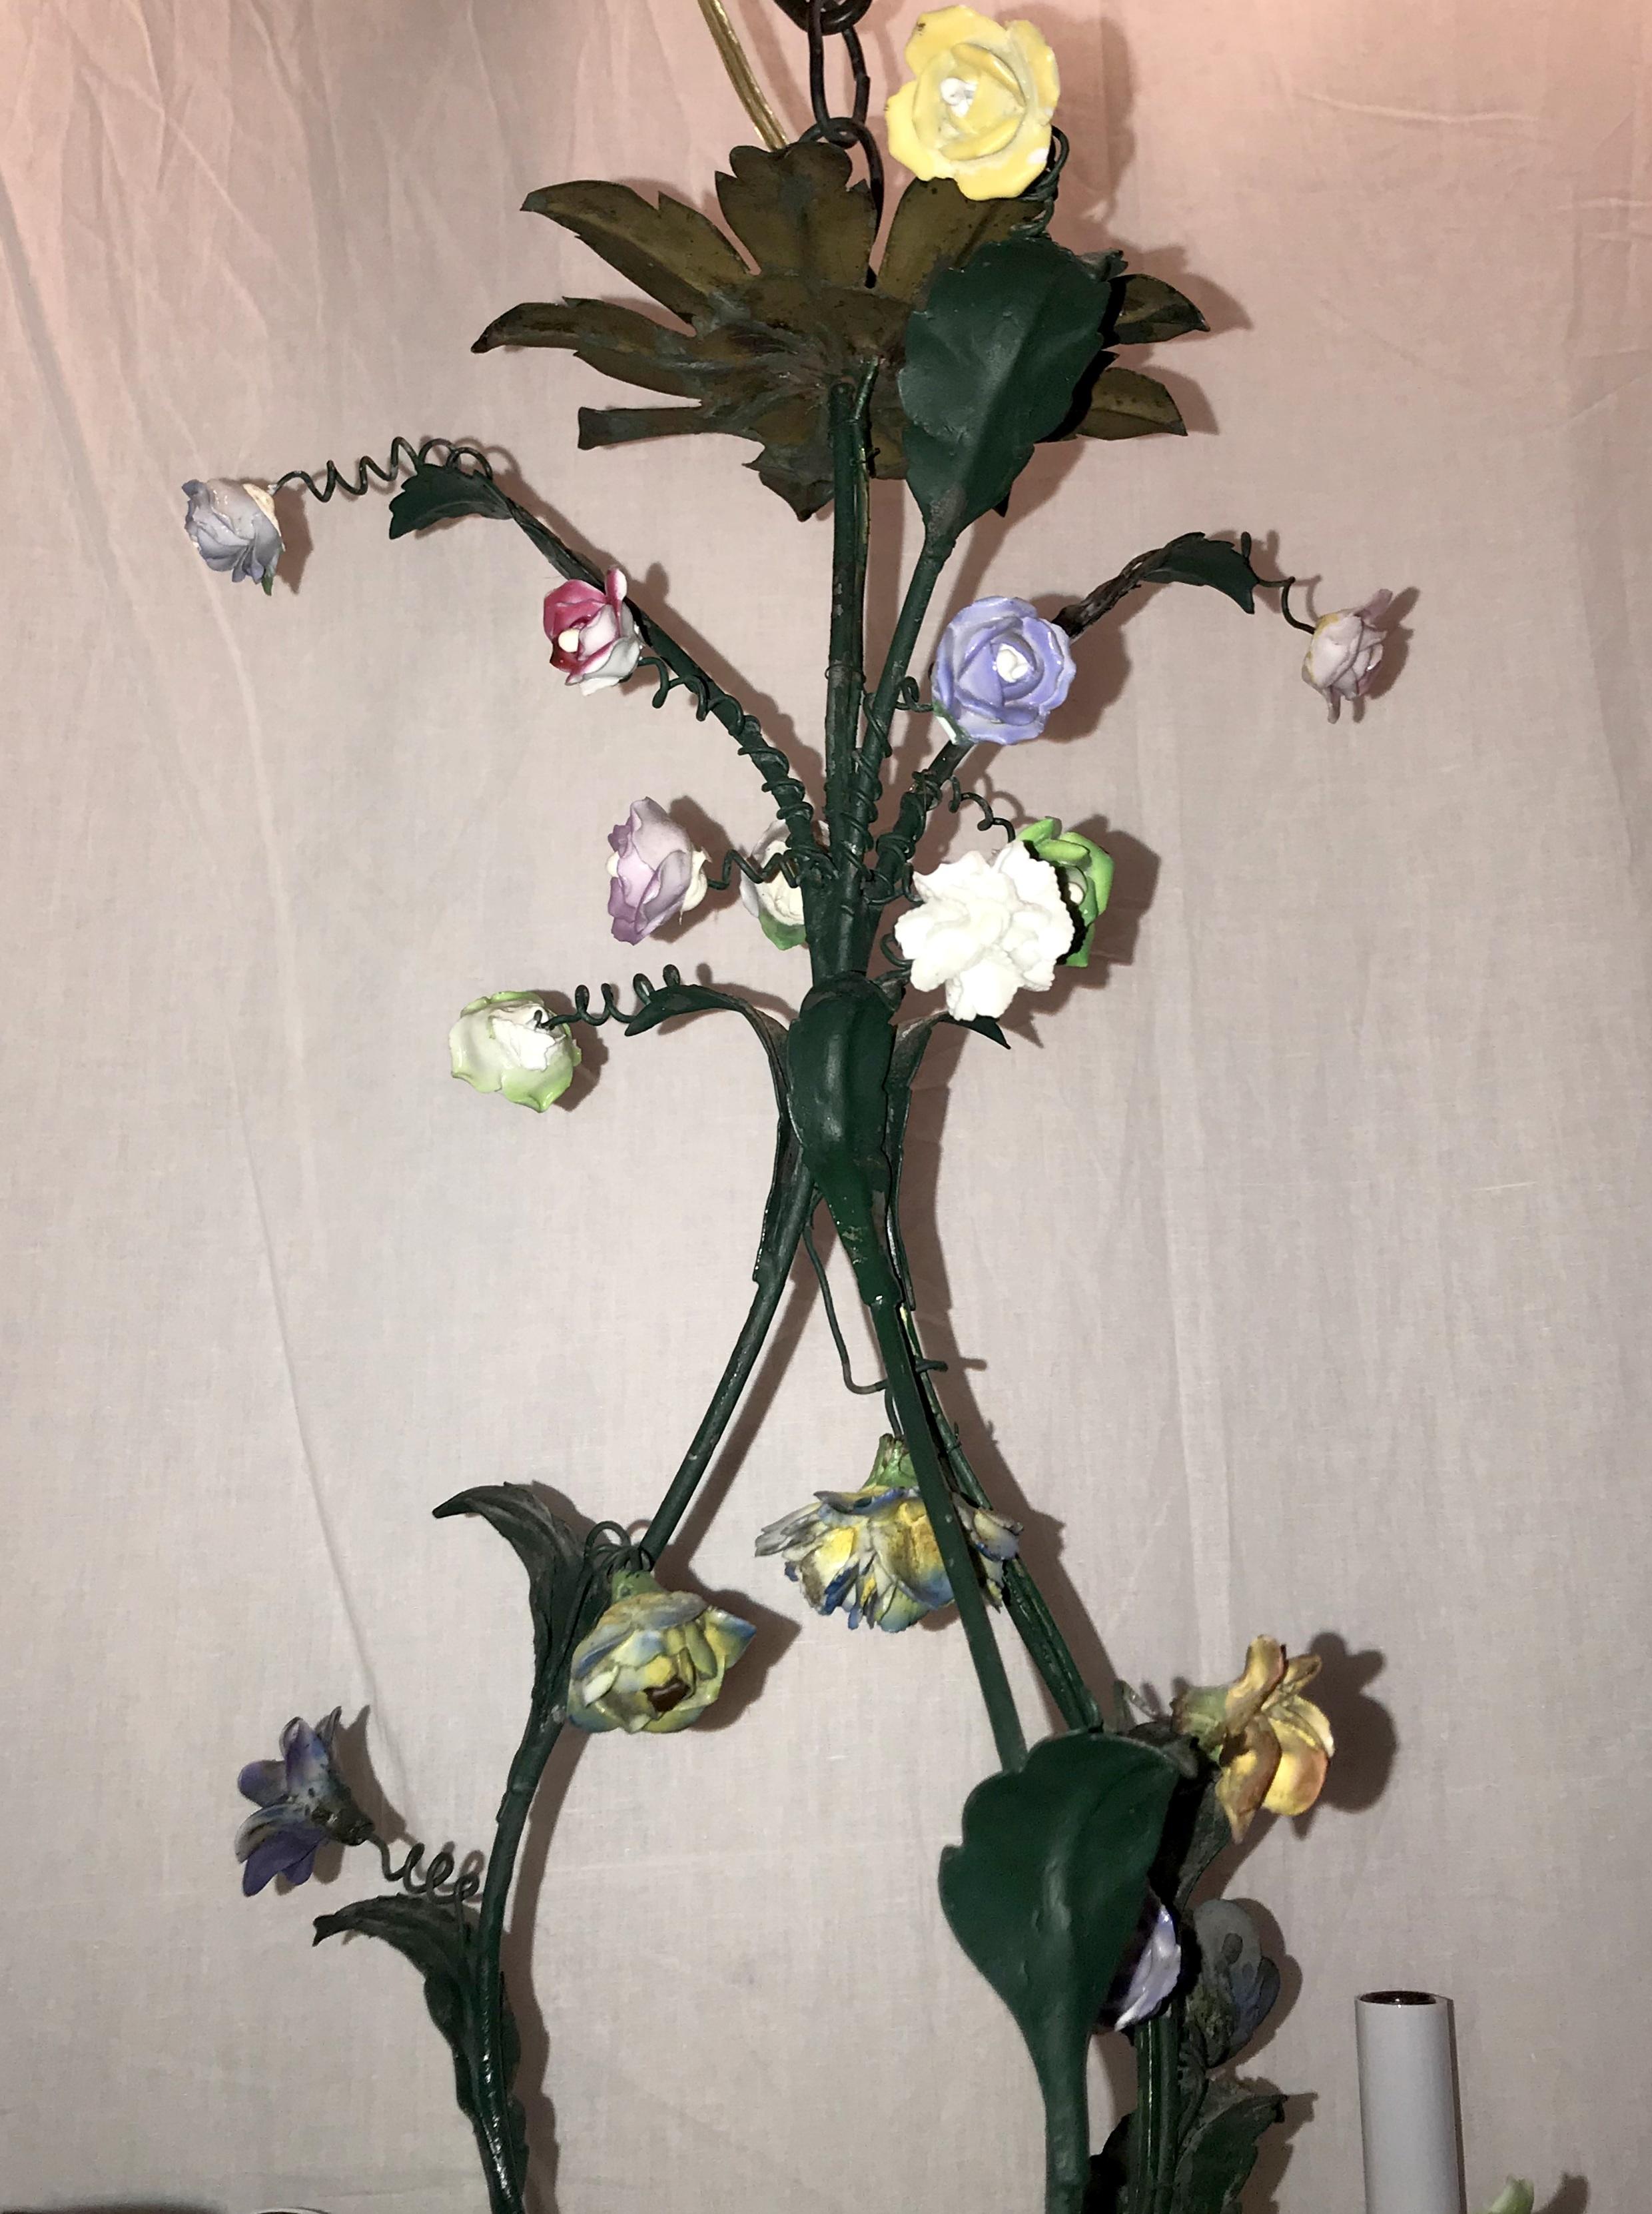 A wonderful Louis XV style green metal and porcelain polychrome painted chandelier adorned with porcelain flowers, 1920s period.
Updated wiring and sockets, comes ready to hang and enjoy.